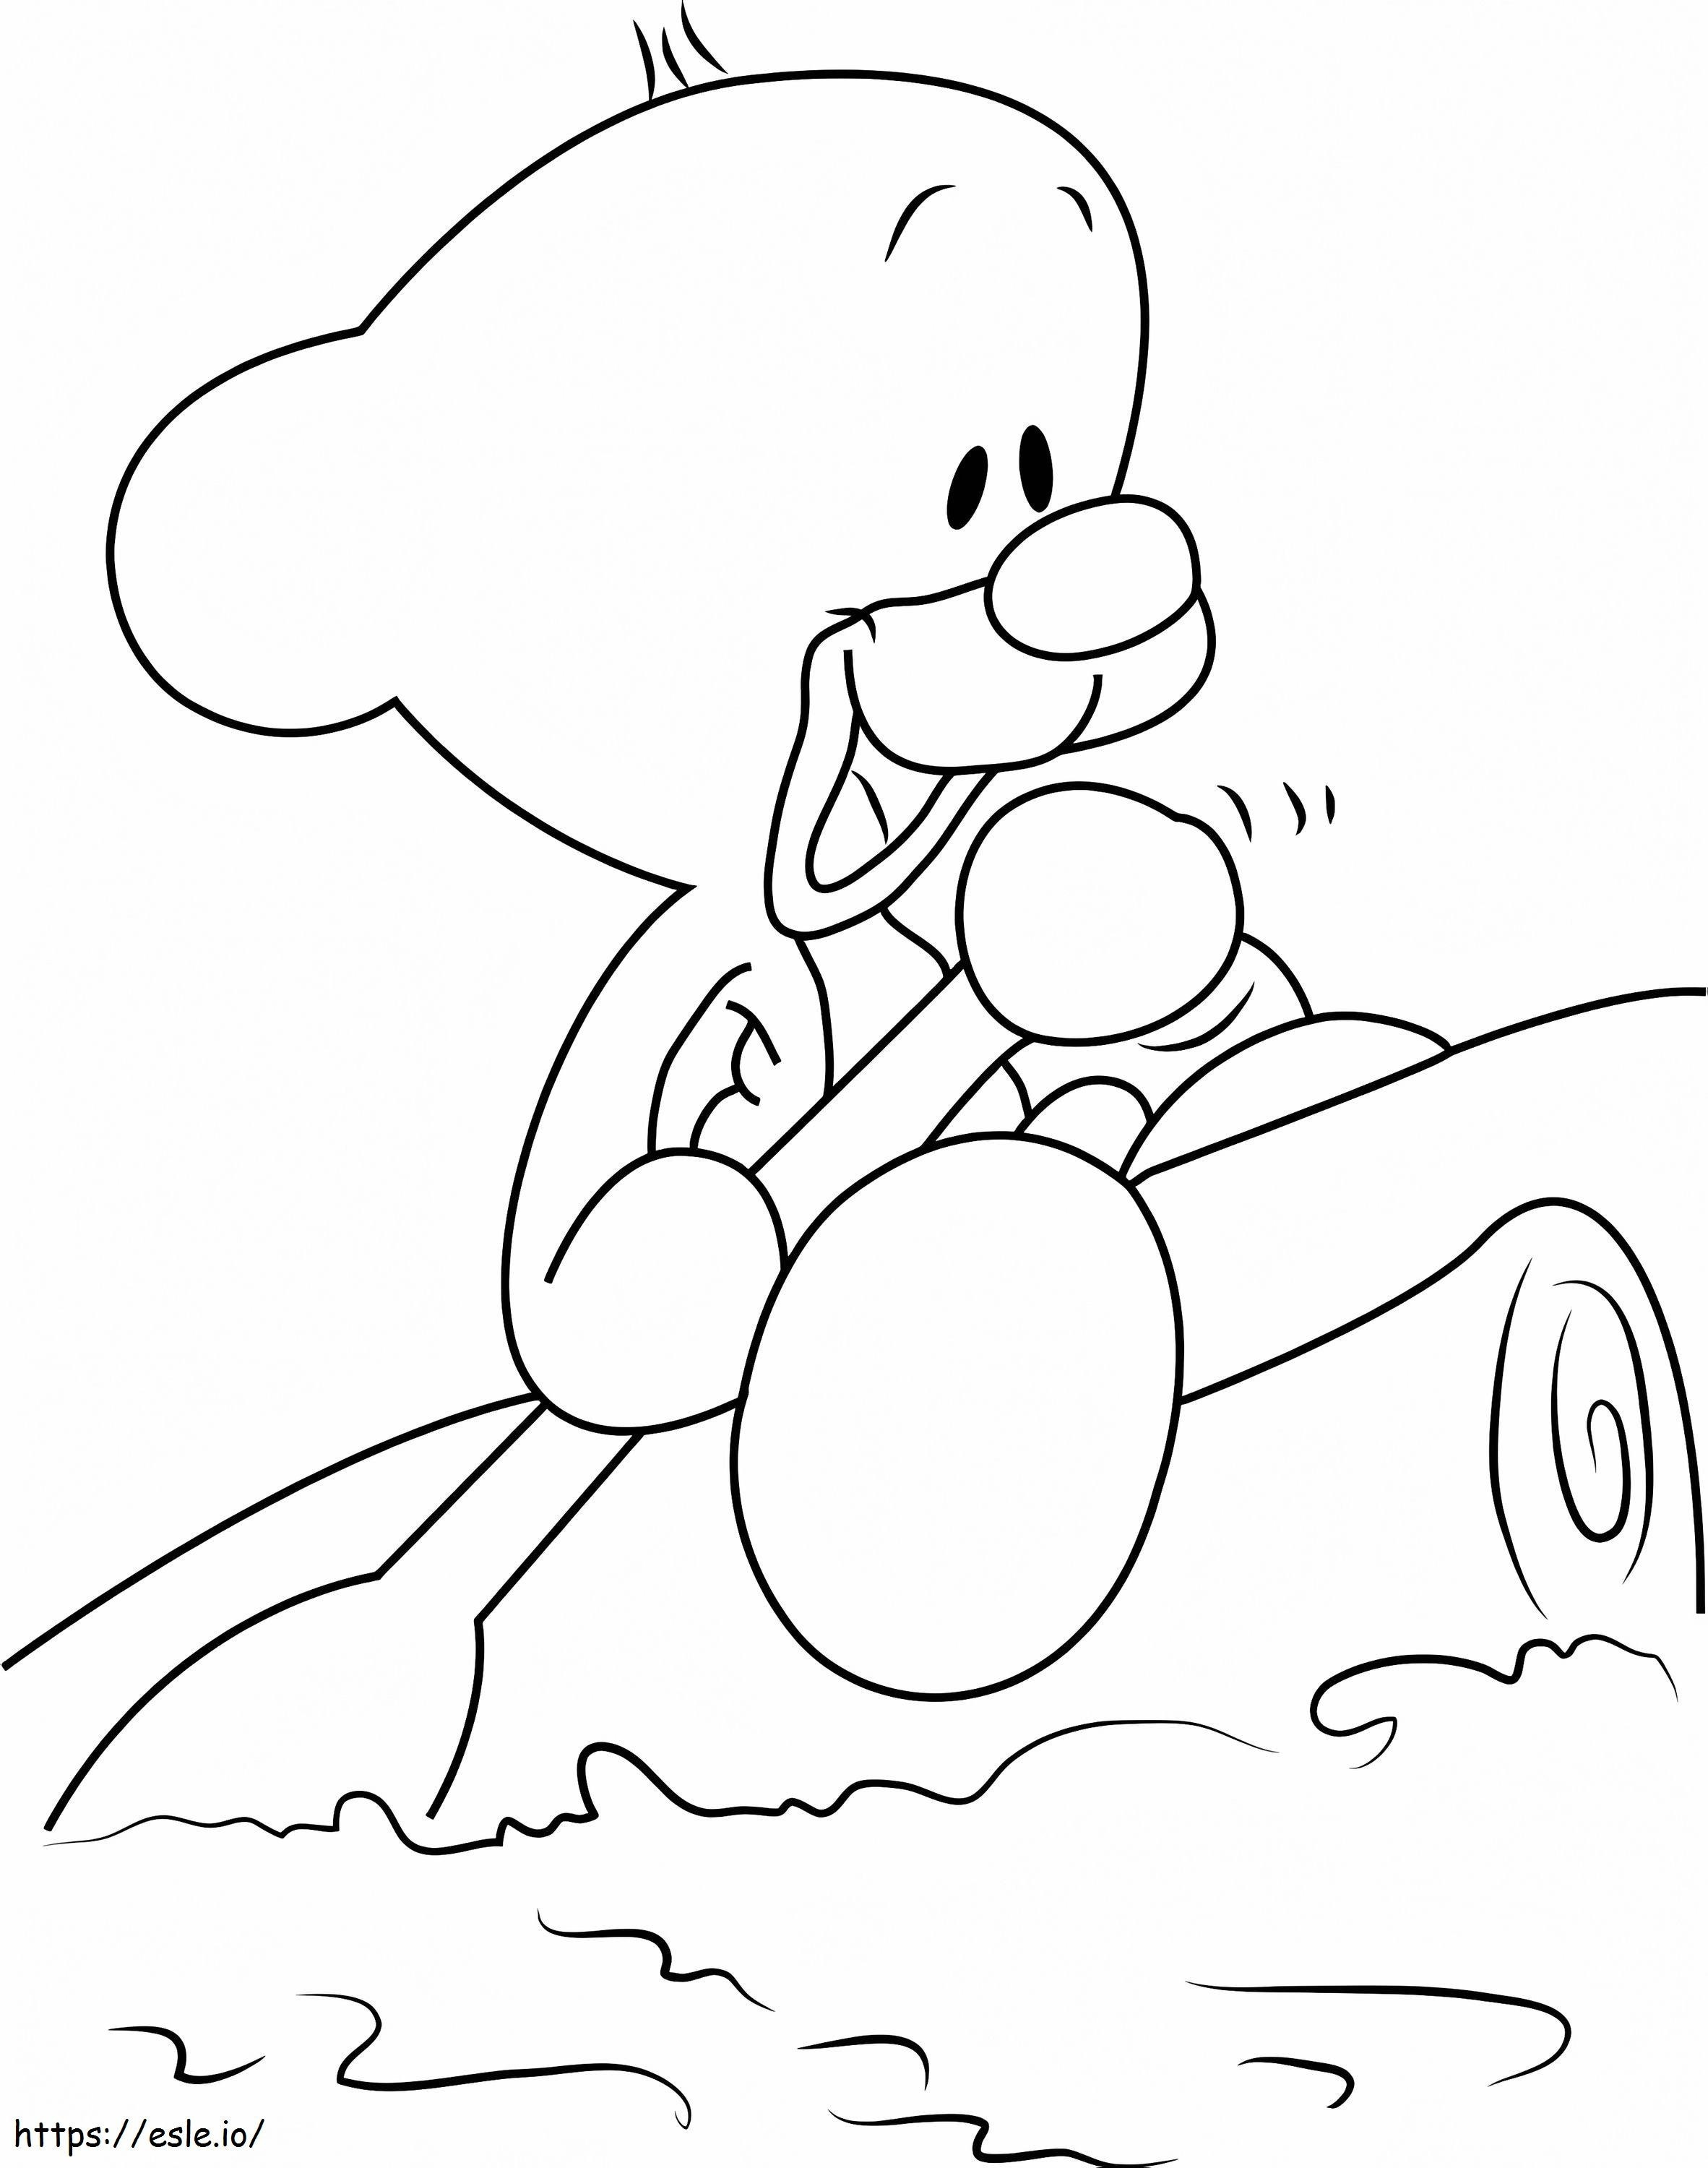 Pimboli On Boat coloring page